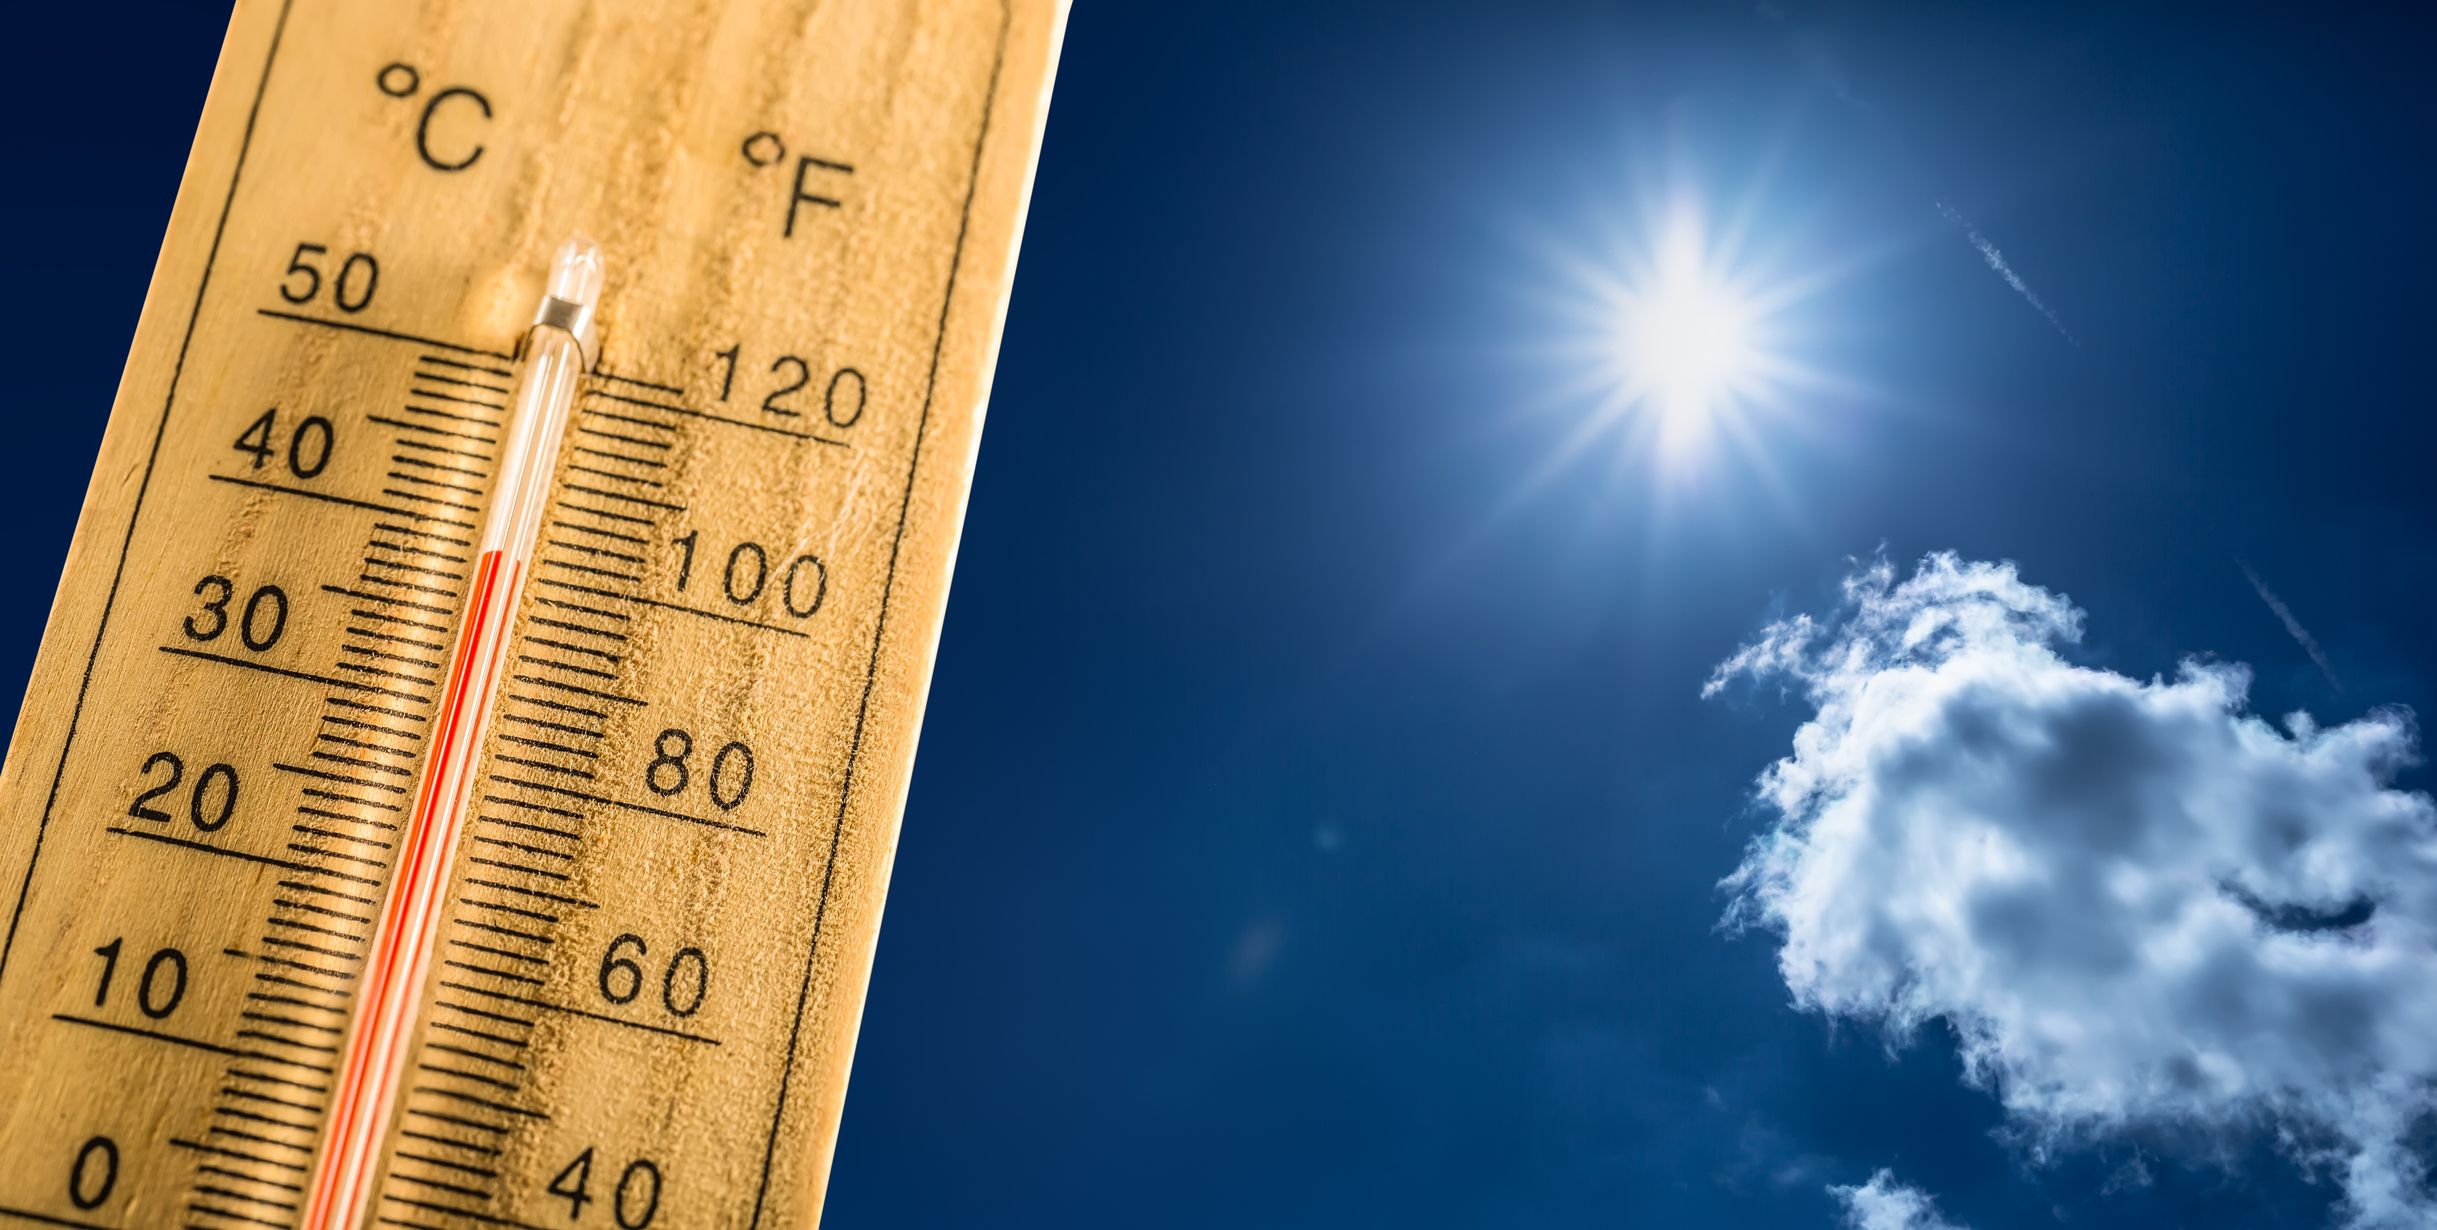 Heat and state: On a heatwave being only one half of the issue